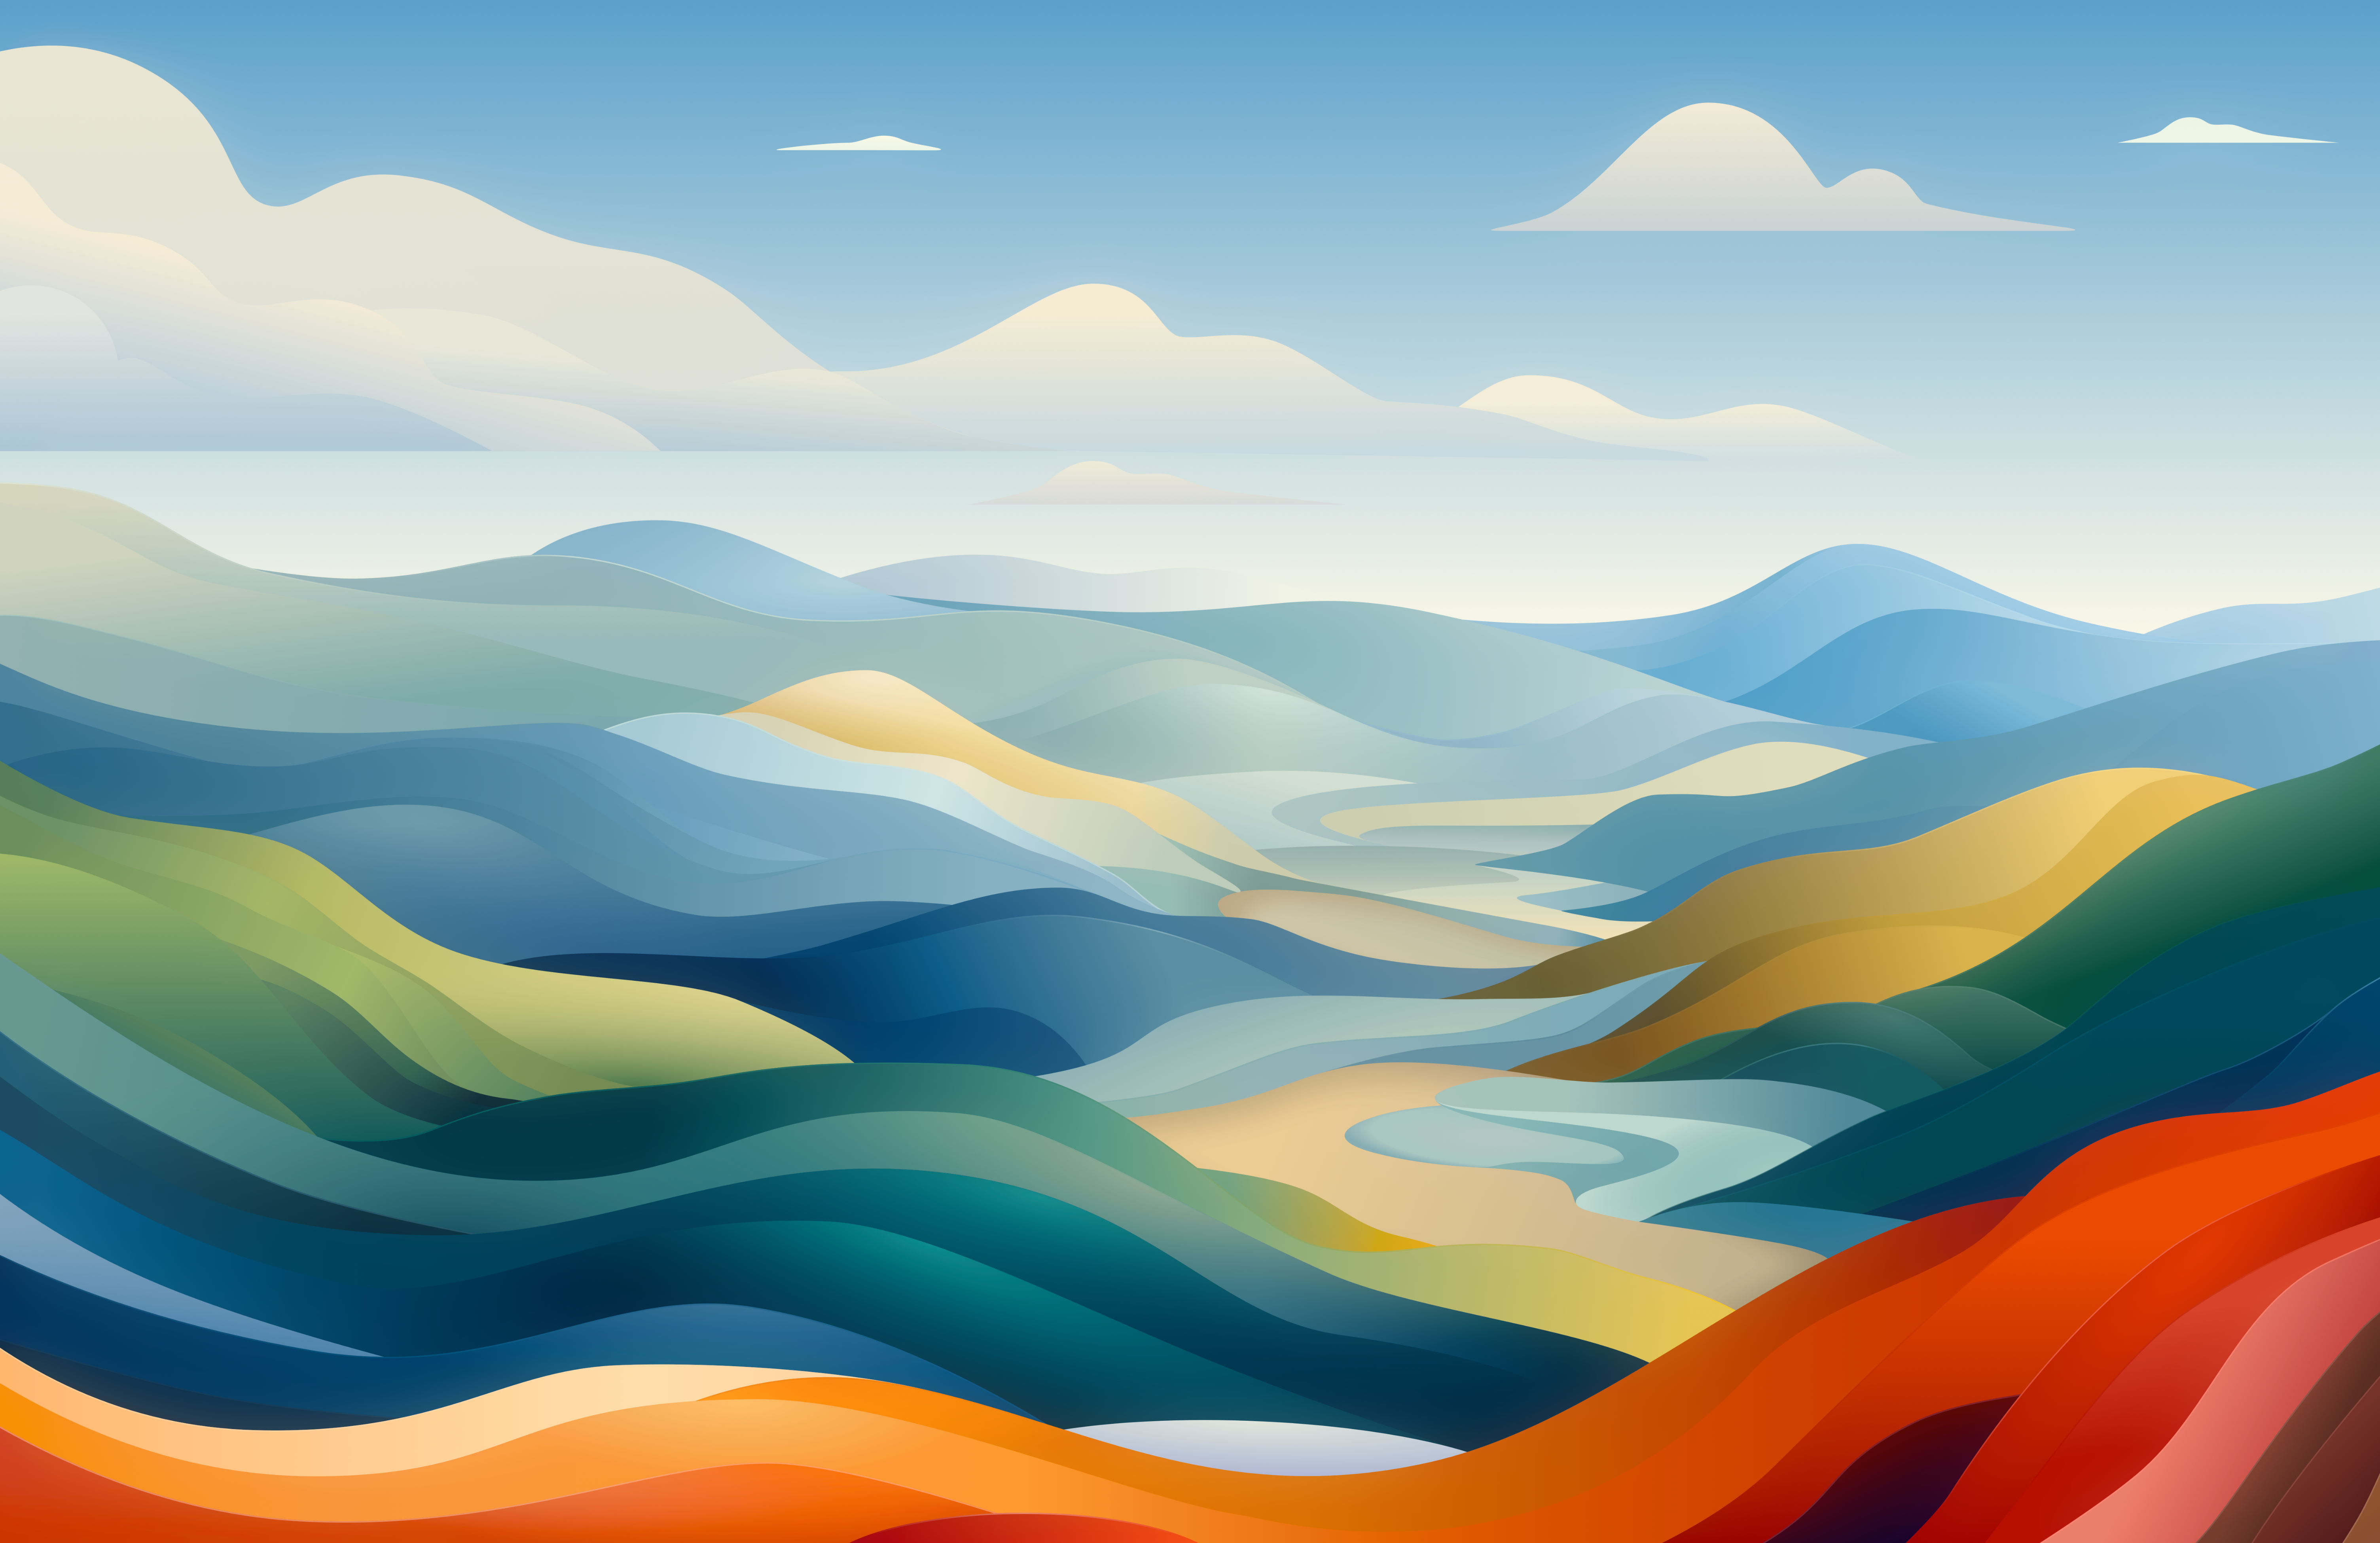 Waves Mountains Sky Clouds 6016x3900